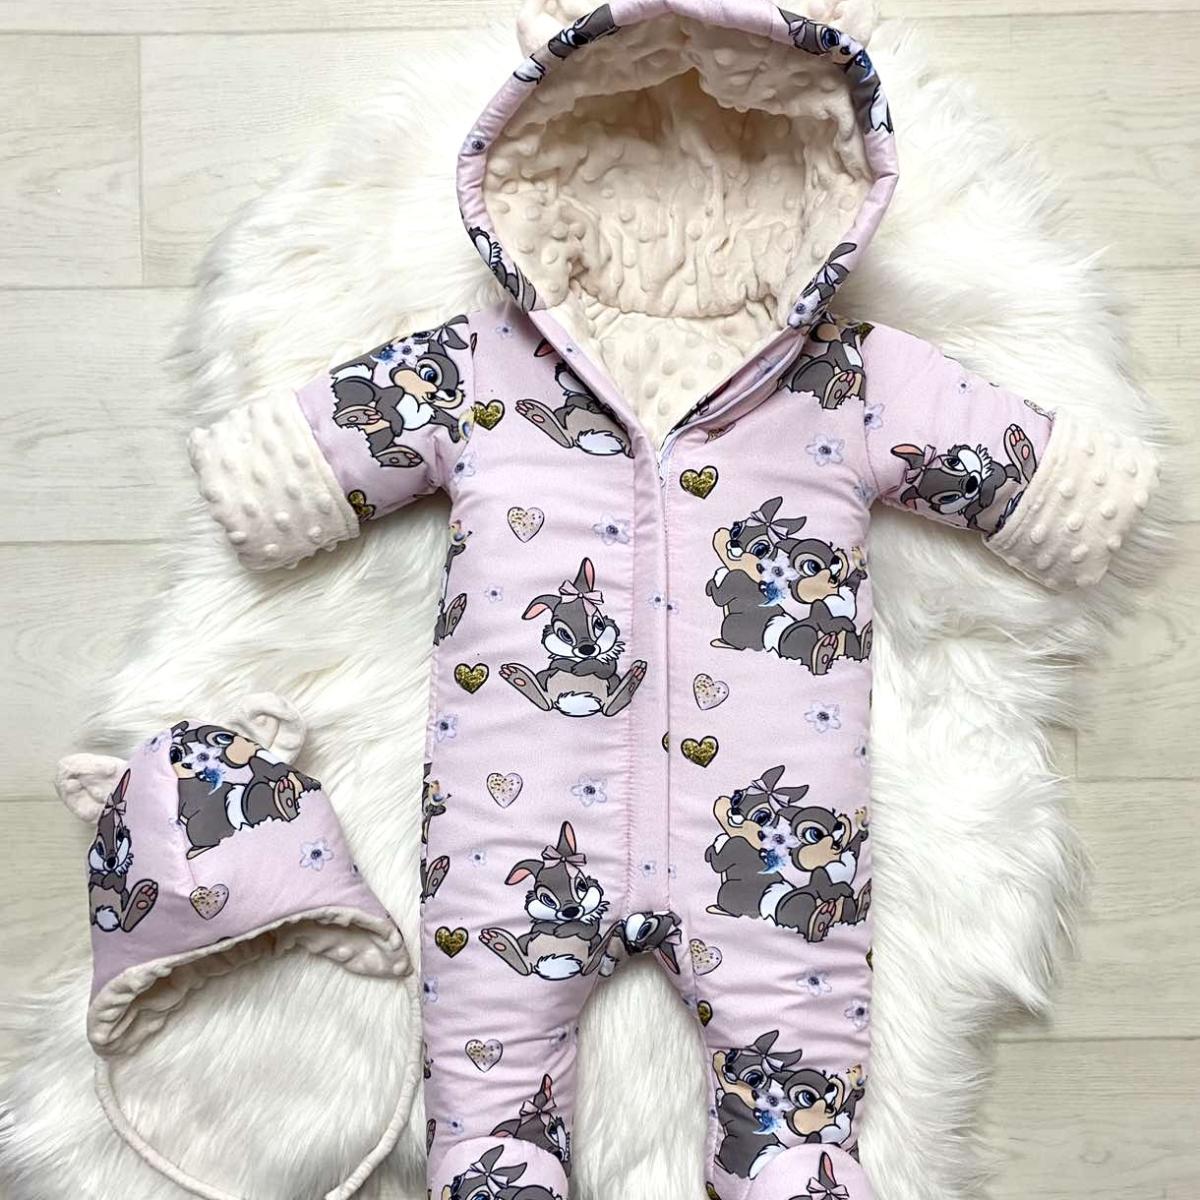 Winter onesie with bunny print on a pink background